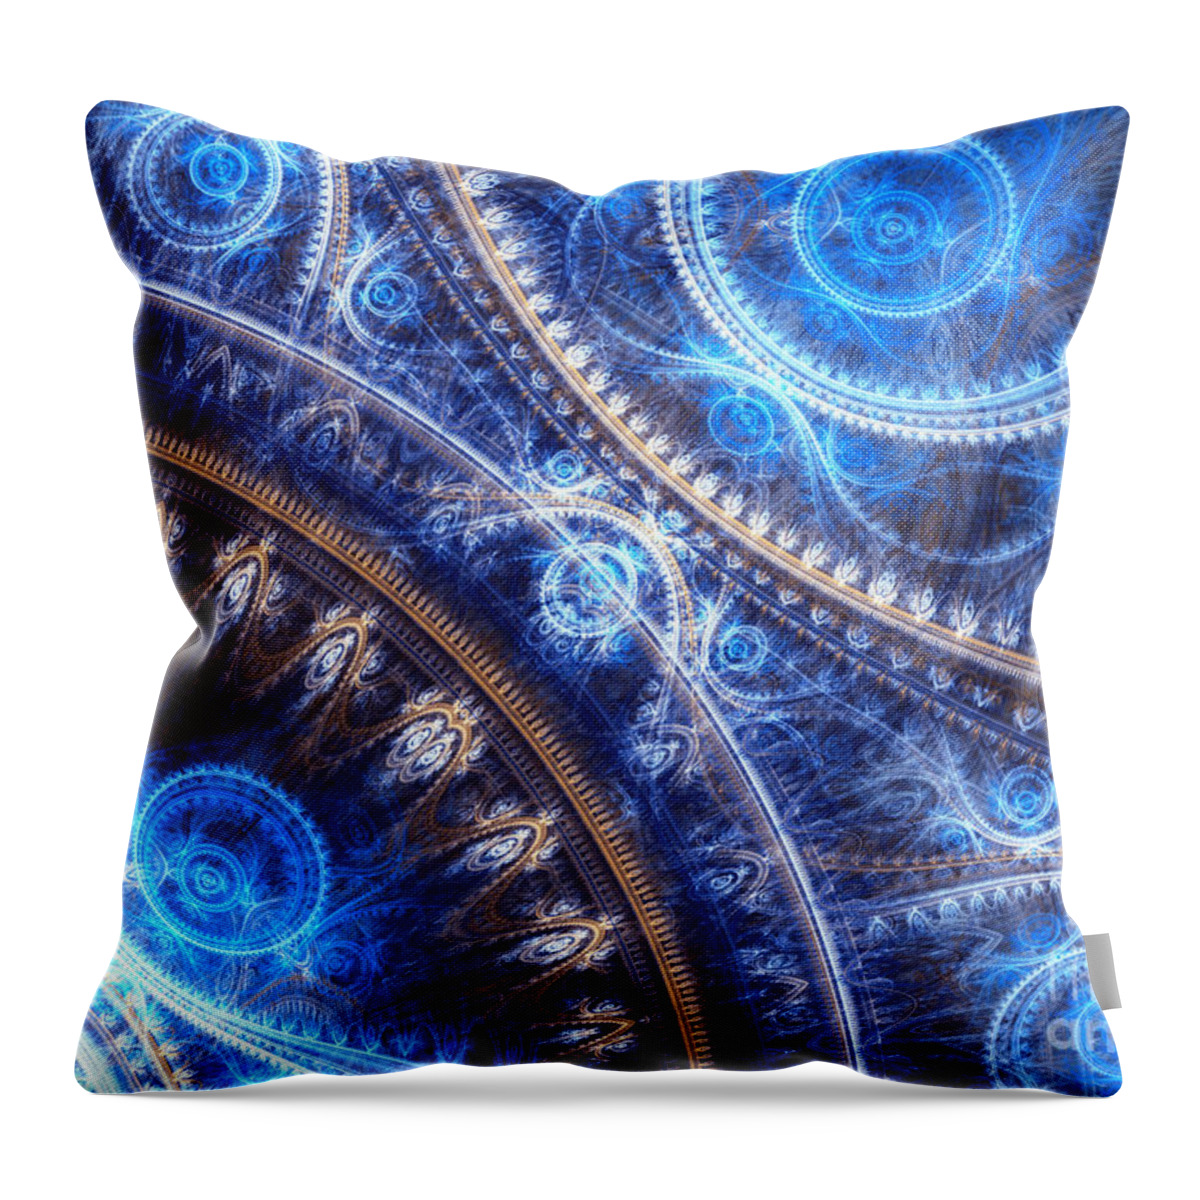 Abstract Throw Pillow featuring the digital art Space-time mesh by Martin Capek